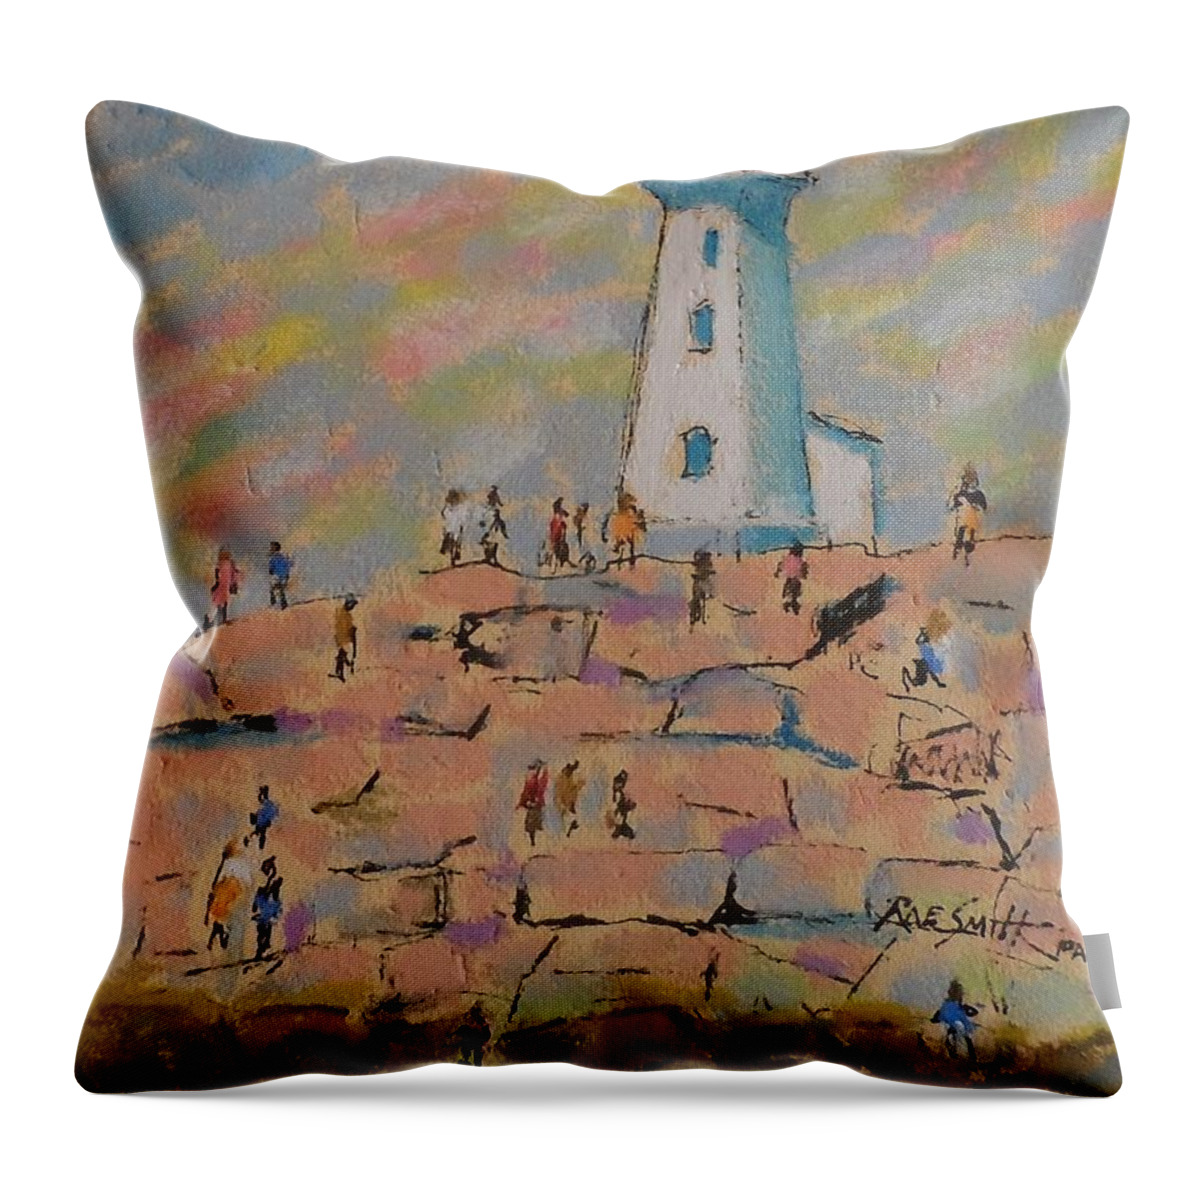 Pastels Throw Pillow featuring the pastel Black Rocks of Peggy's Cove by Rae Smith PAC